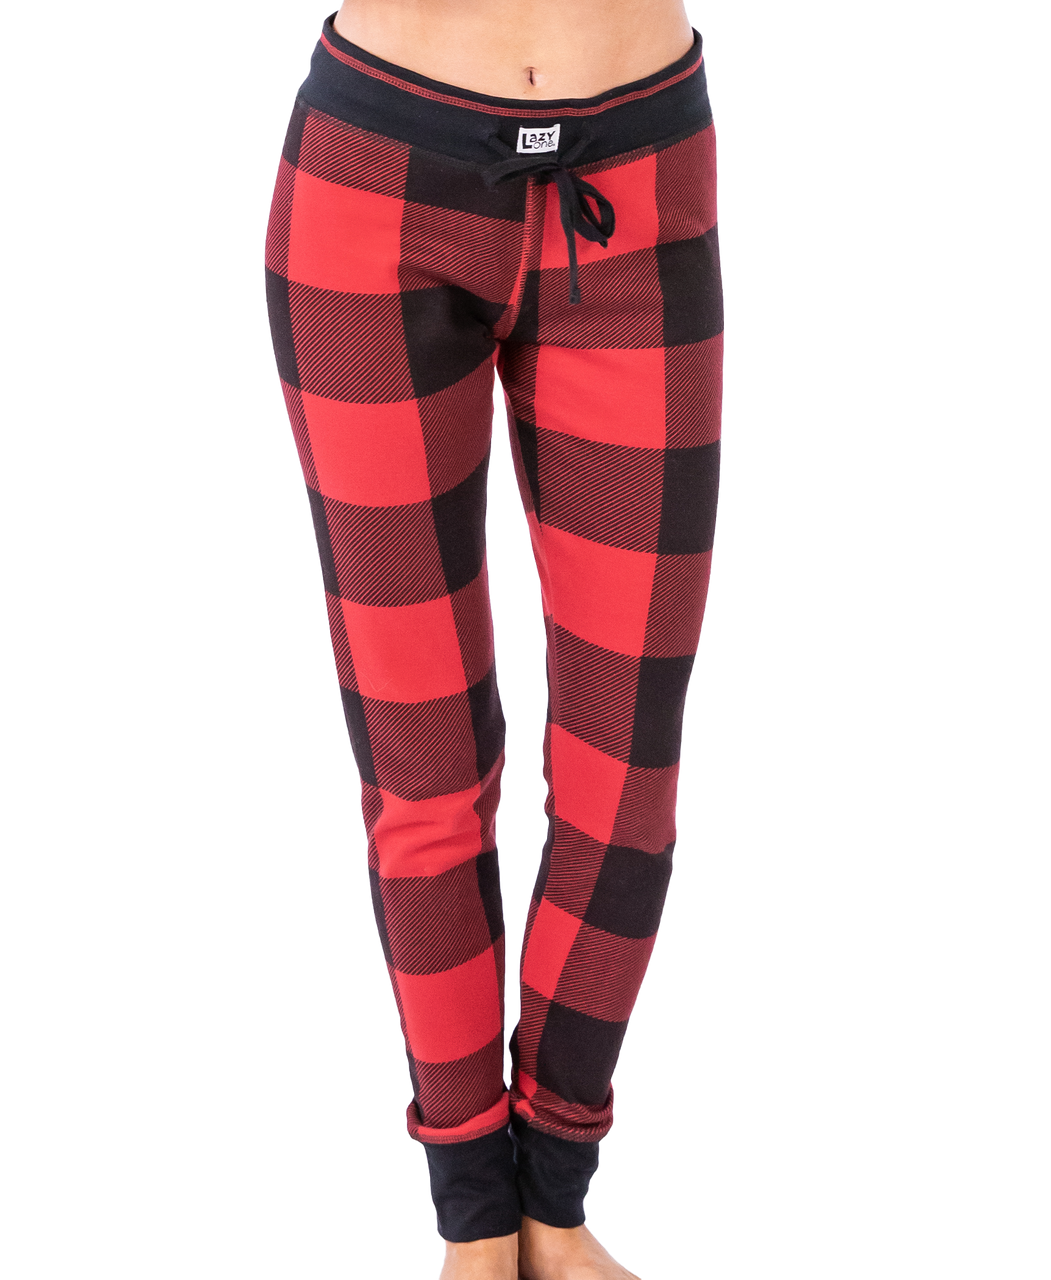 Floerns Women's Plaid High Waist Active Workout Sport Tights Pants Leggings  Red XS at Amazon Women's Clothing store